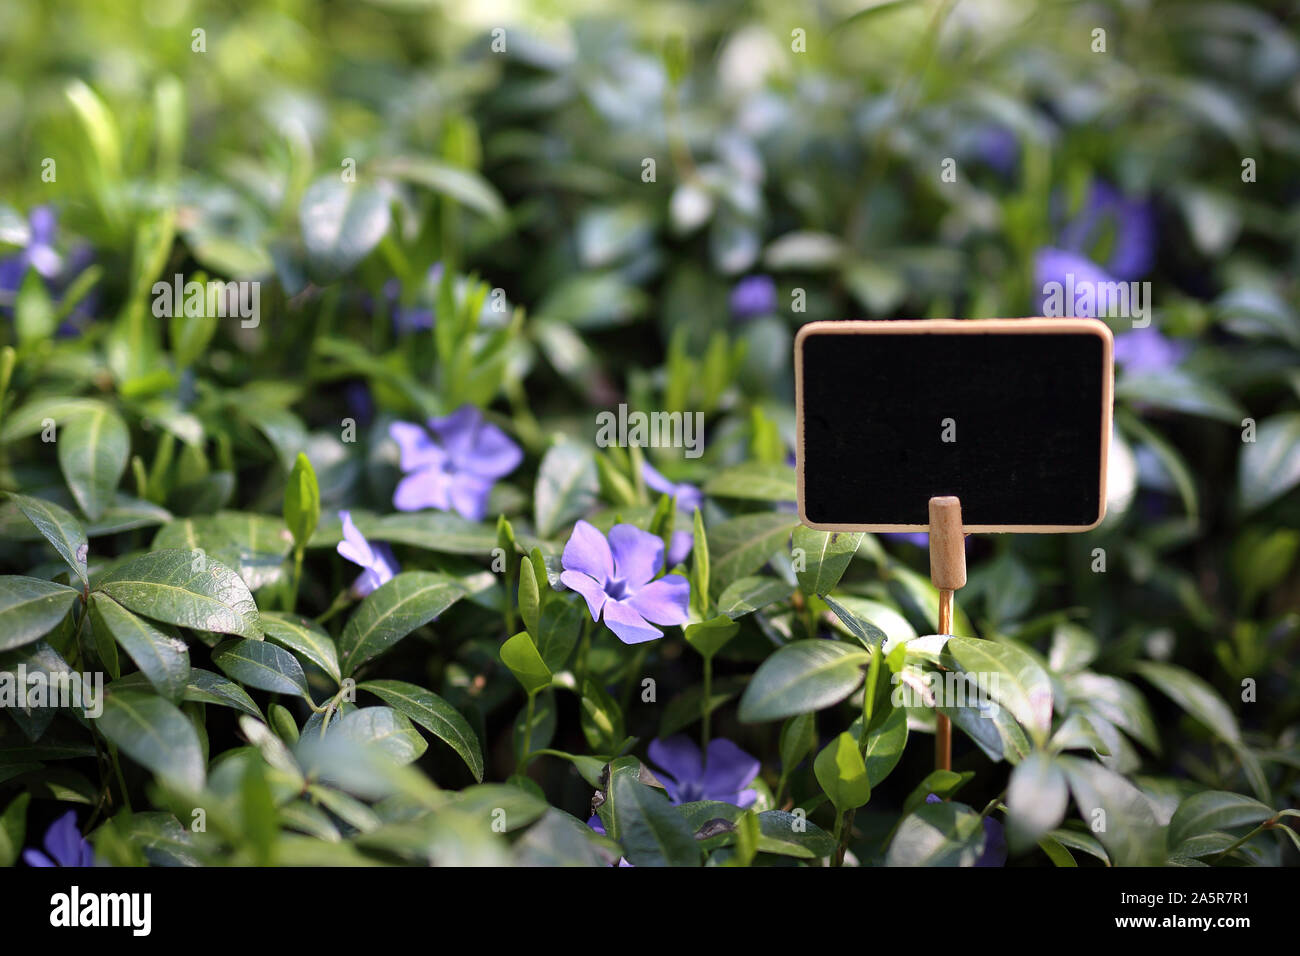 Common periwinkle, evergreen ground cover plant. Gardening Stock Photo